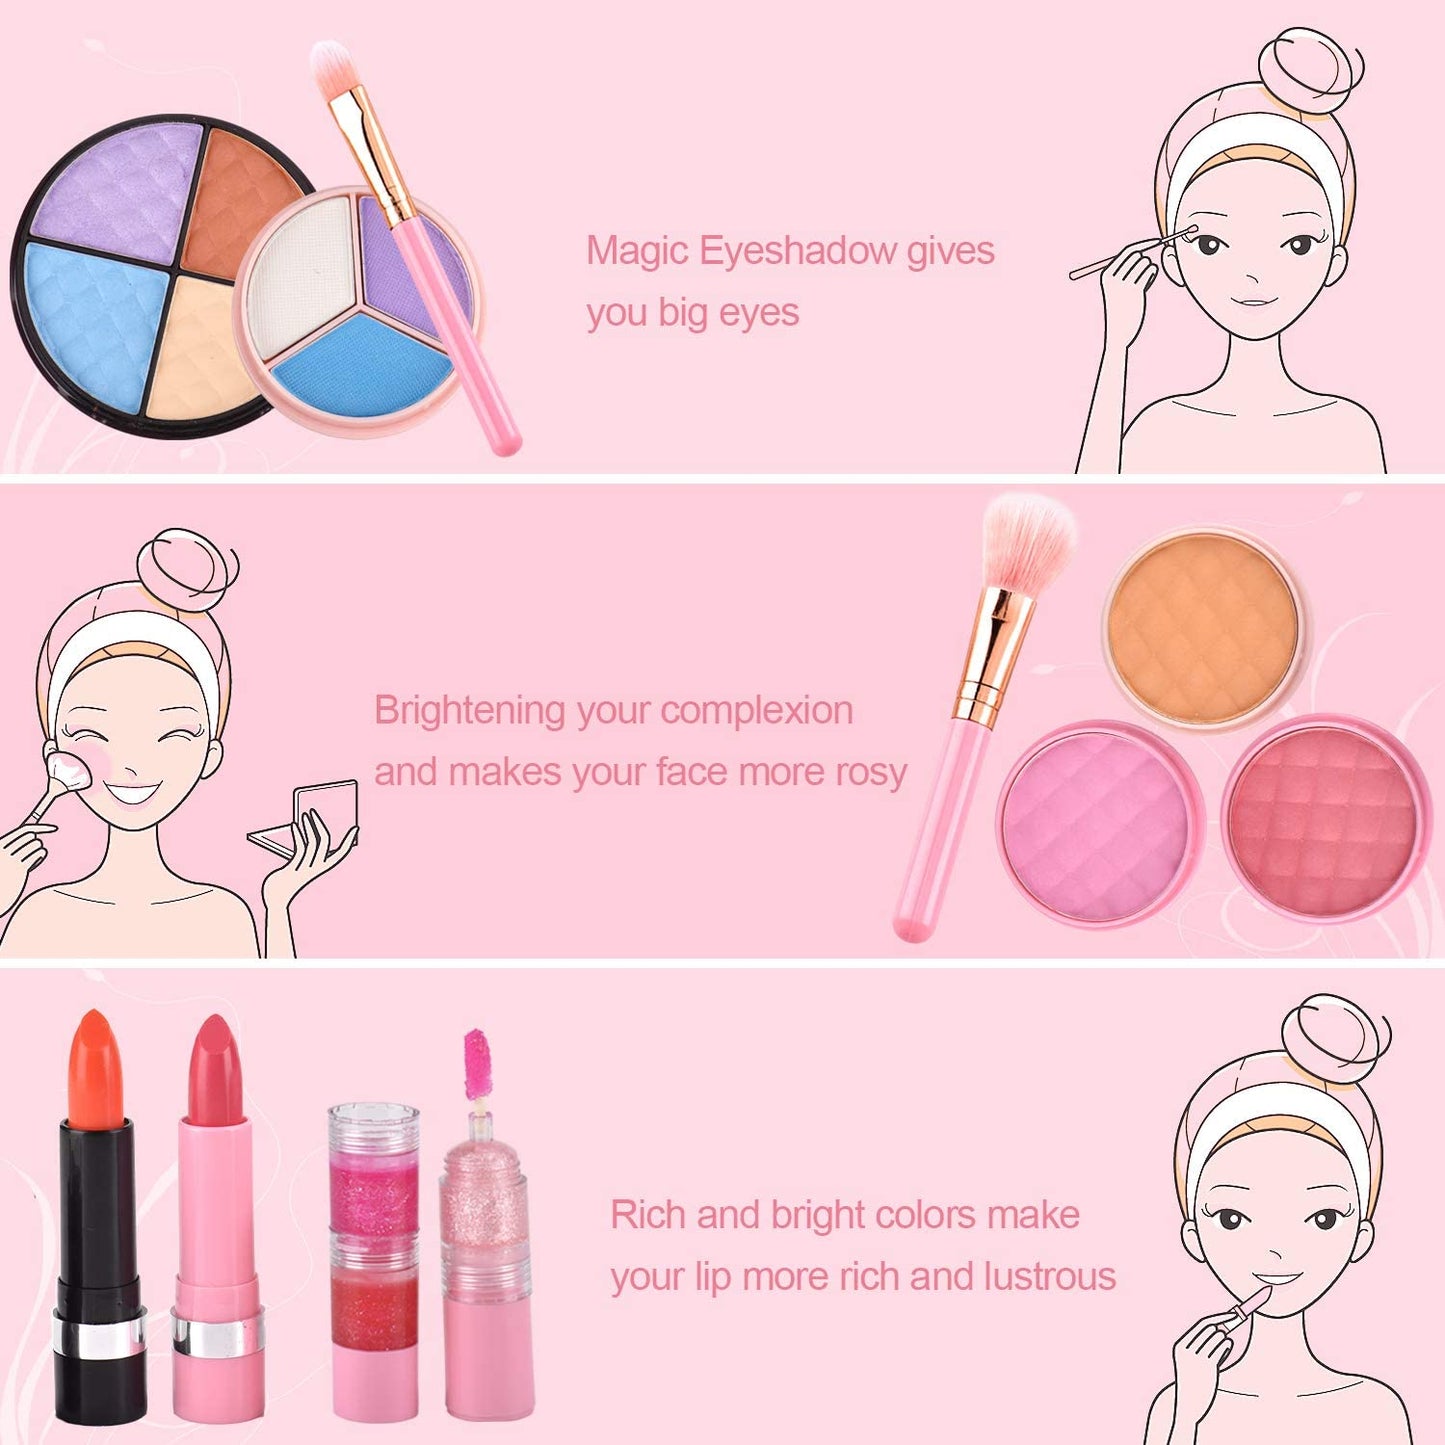 21 Pcs Kids Makeup Kit for Girl, Washable Makeup Toy Set, Safe & Non-Toxic,Real Cosmetic Beauty Set for Kids Play Game Halloween Christmas Birthday Party